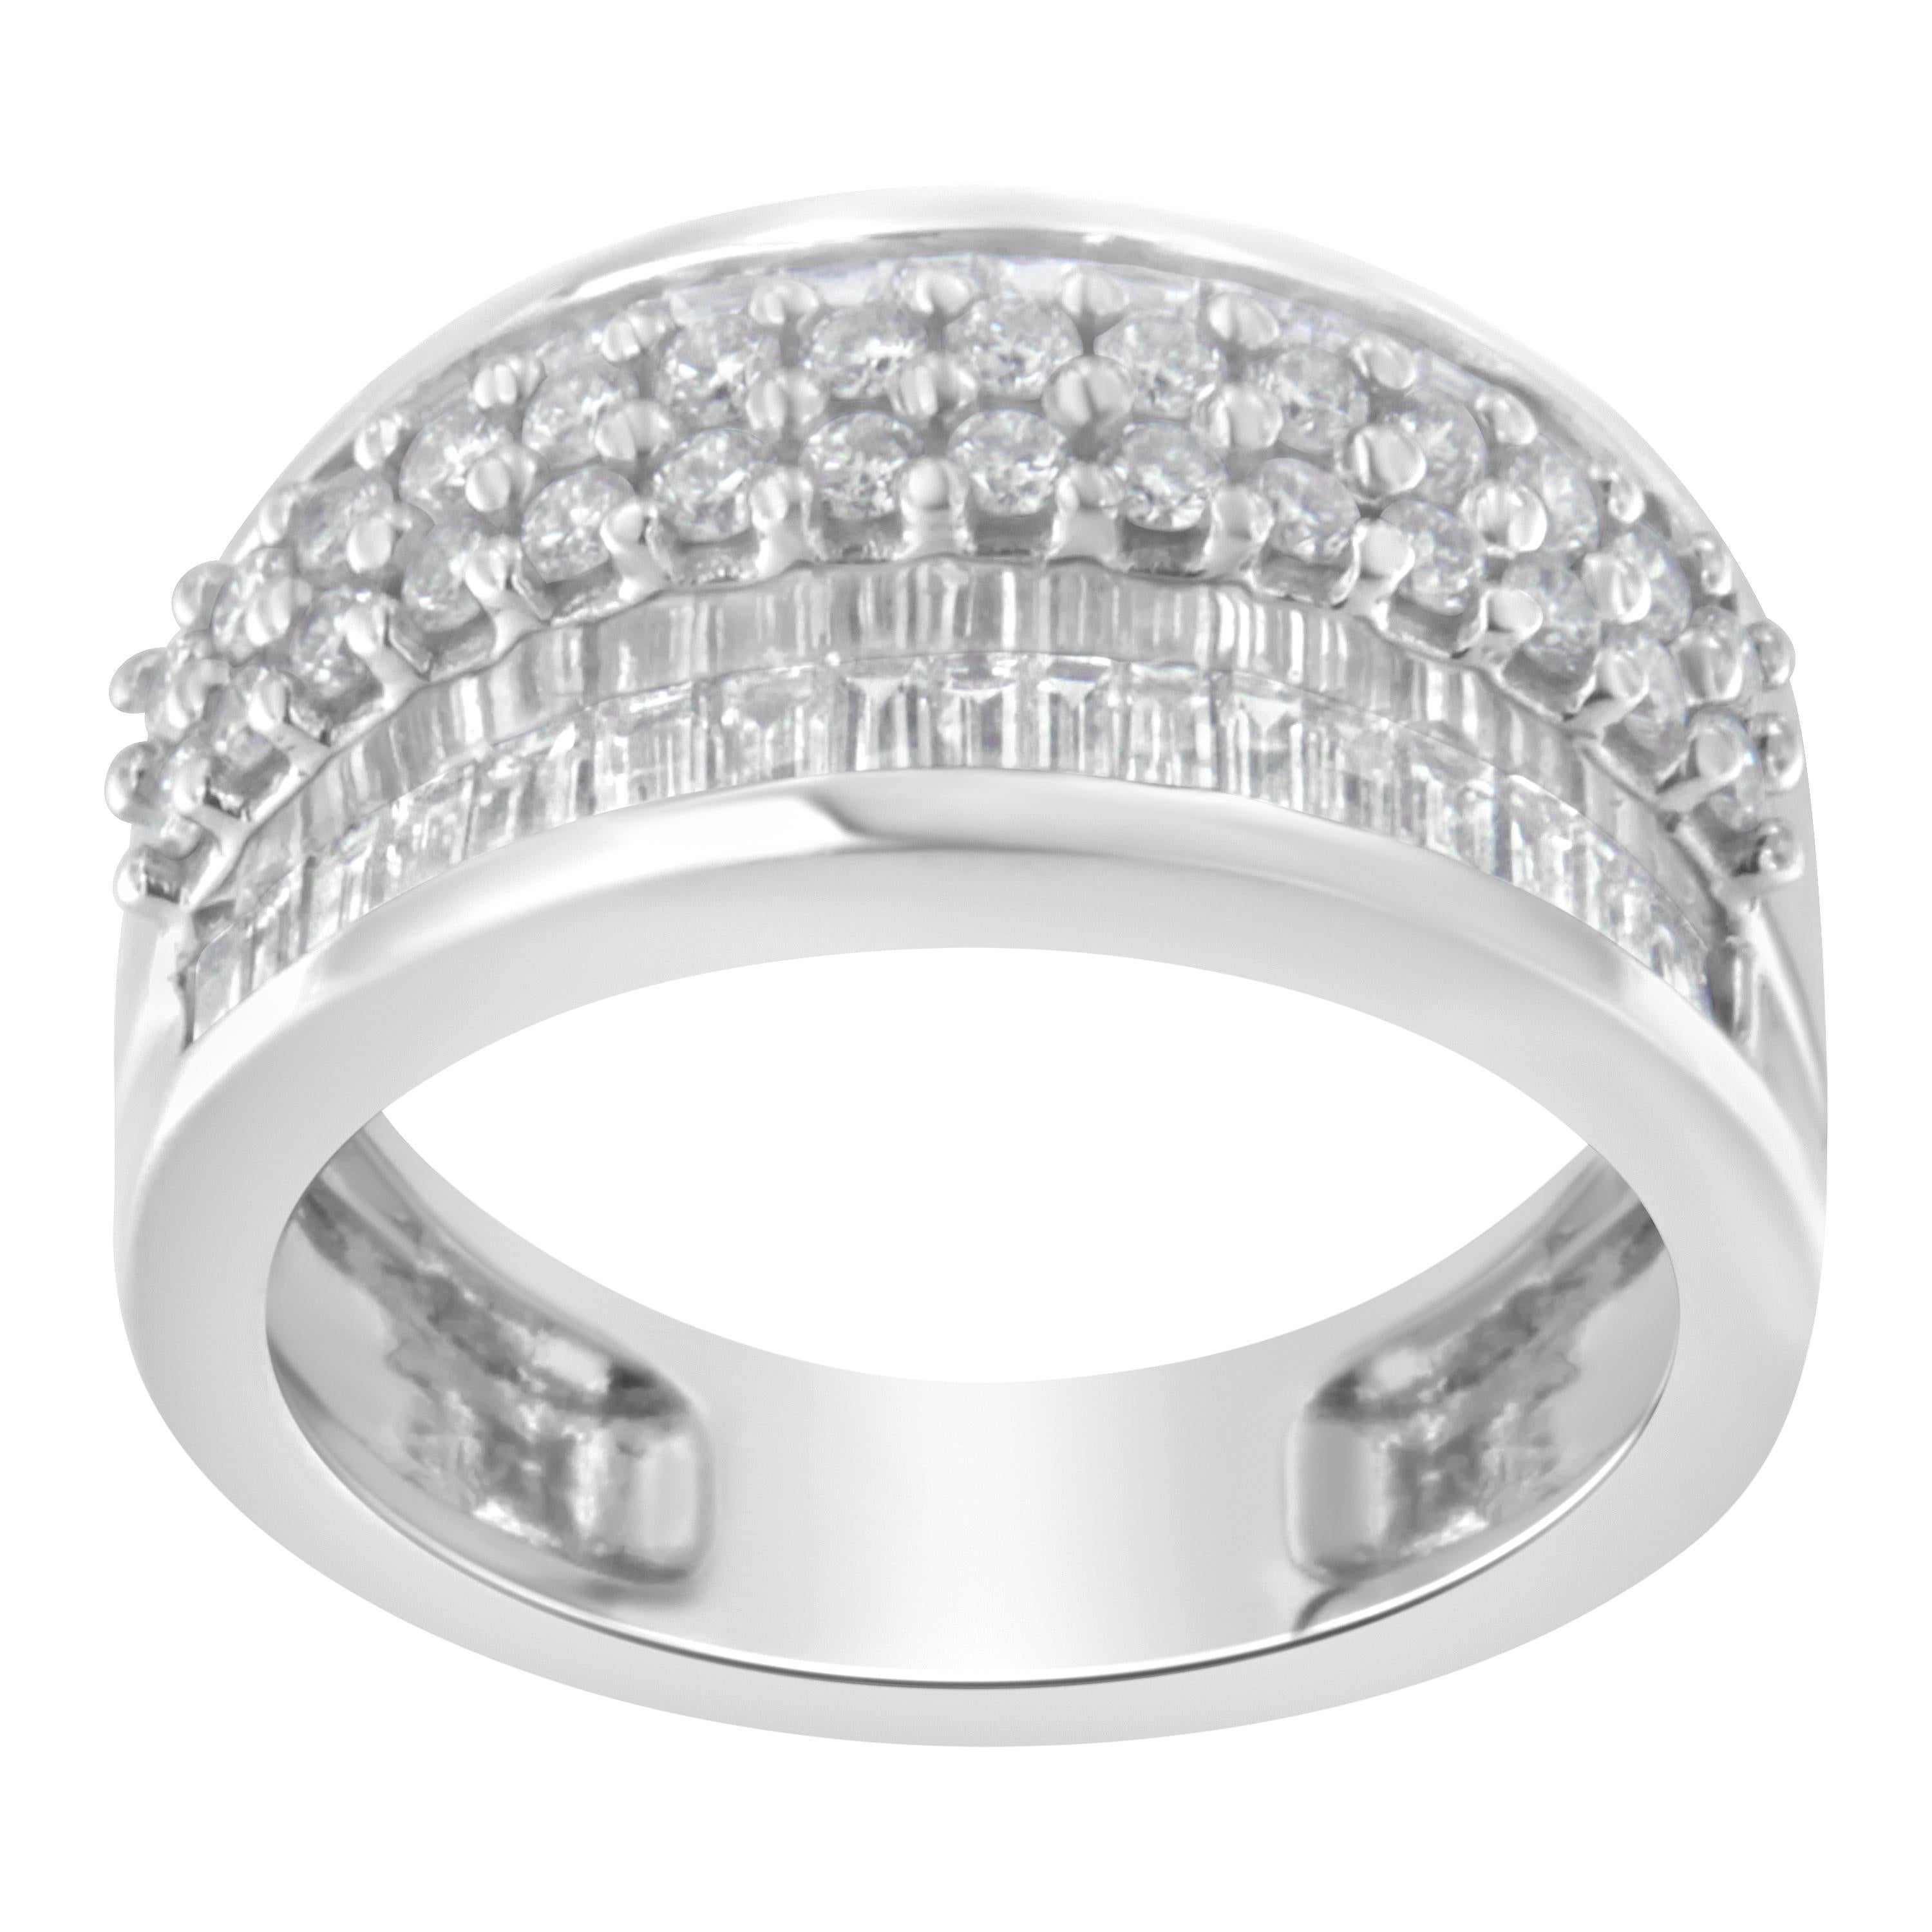 For Sale:  14K White Gold 1 1/2 Carat Round and Baguette Diamond Ring 2